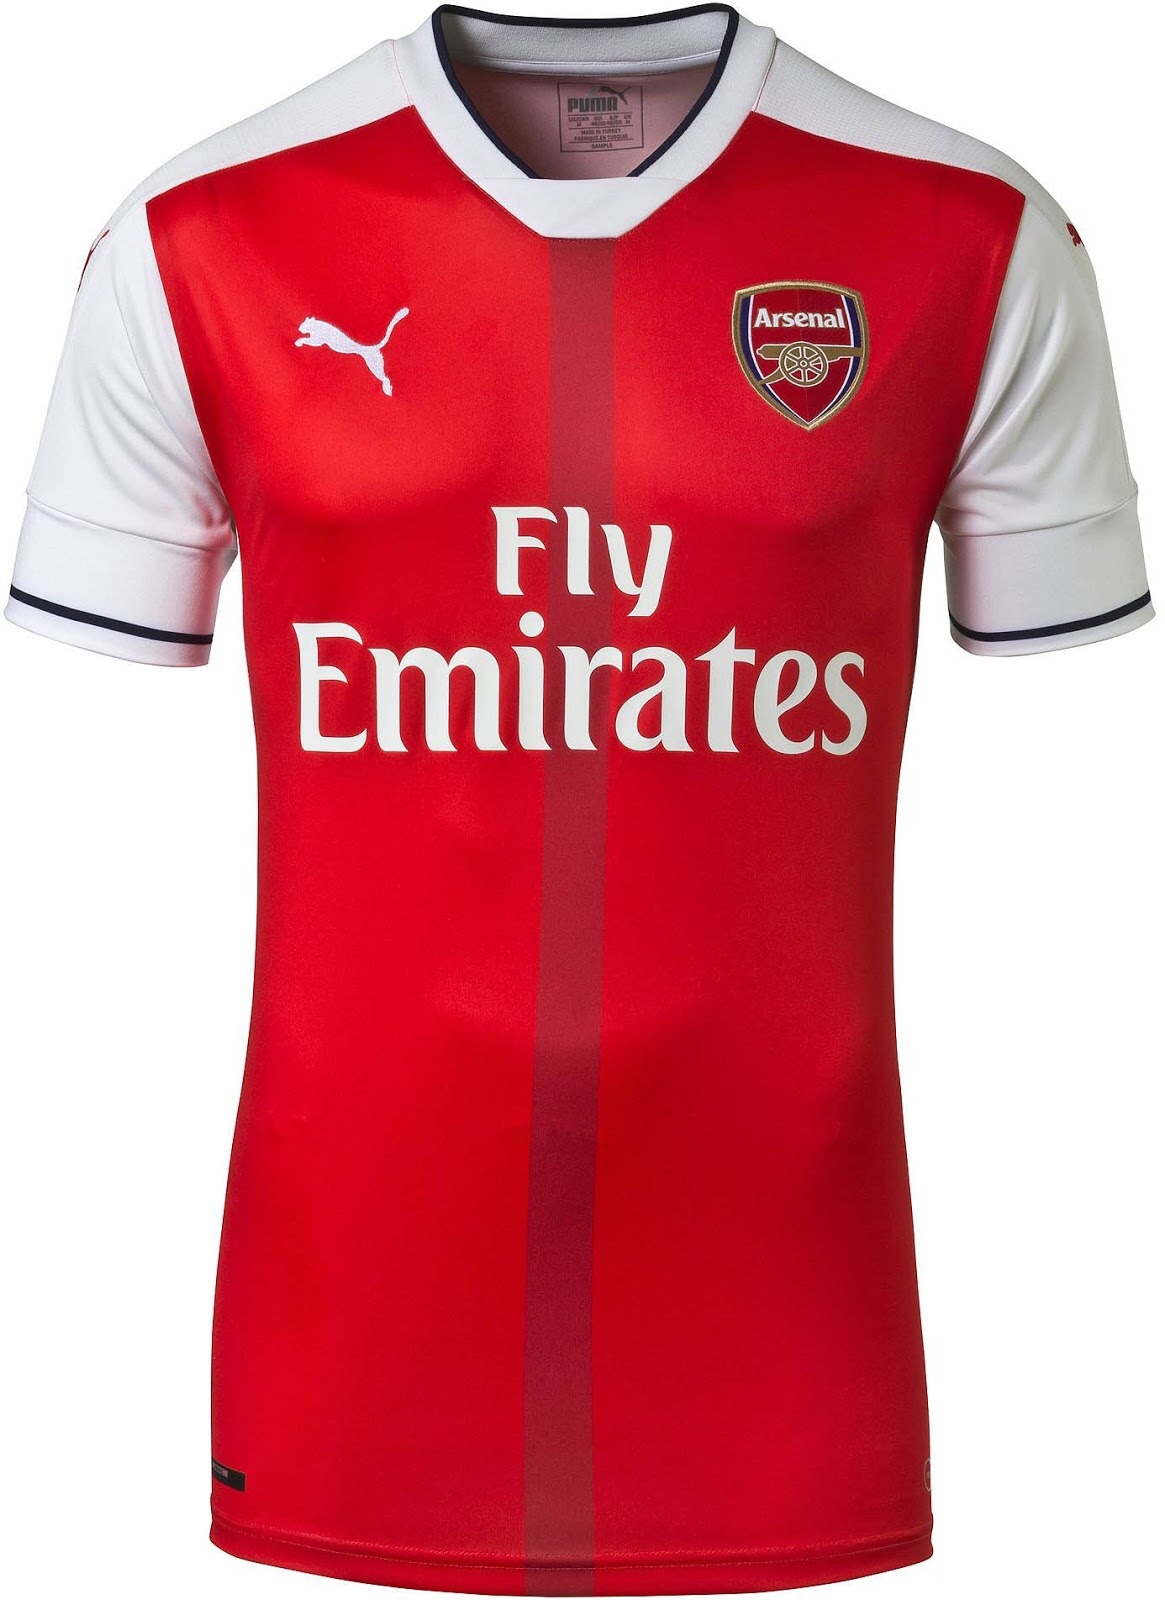 Arsenal FC Home Jersey 16/17 - The 